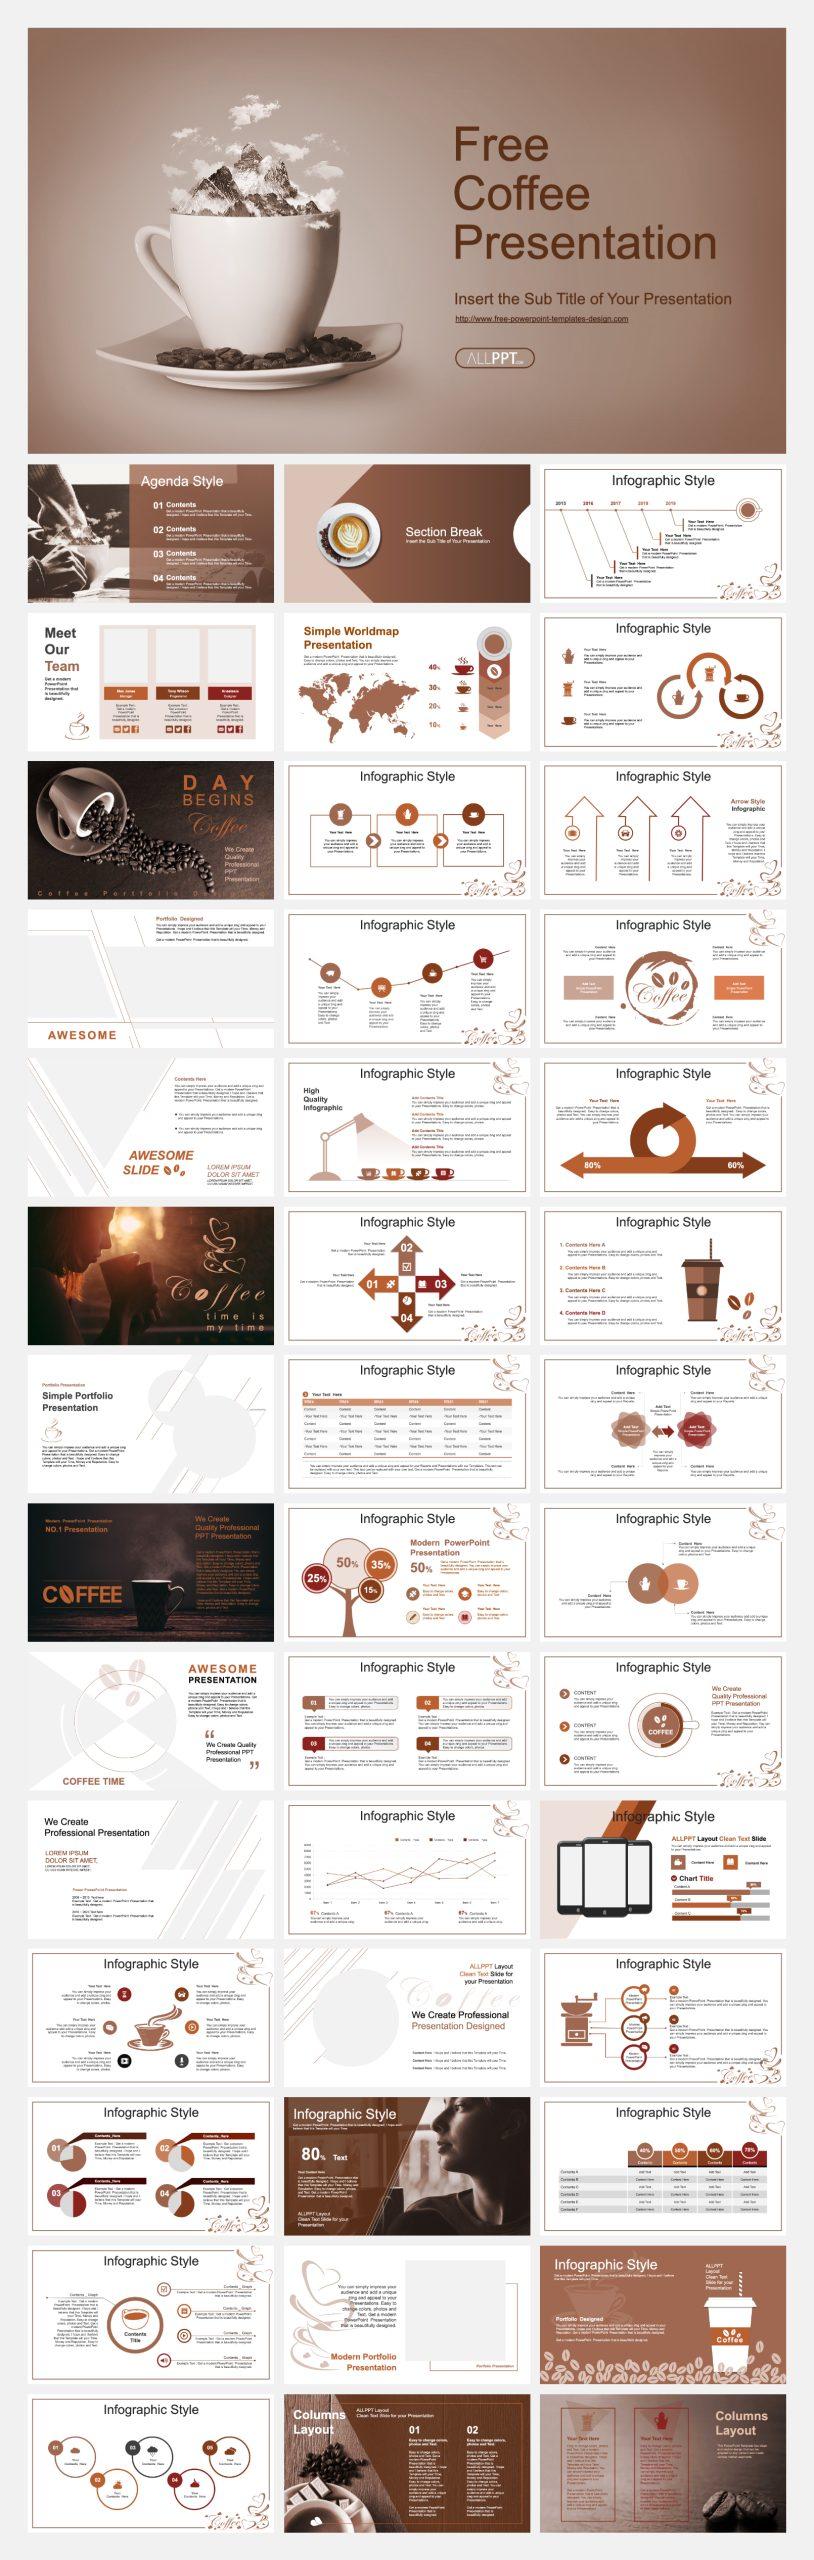 This is a preview of the Free Coffee PowerPoint Templates -coffee shop business plan PowerPoint template